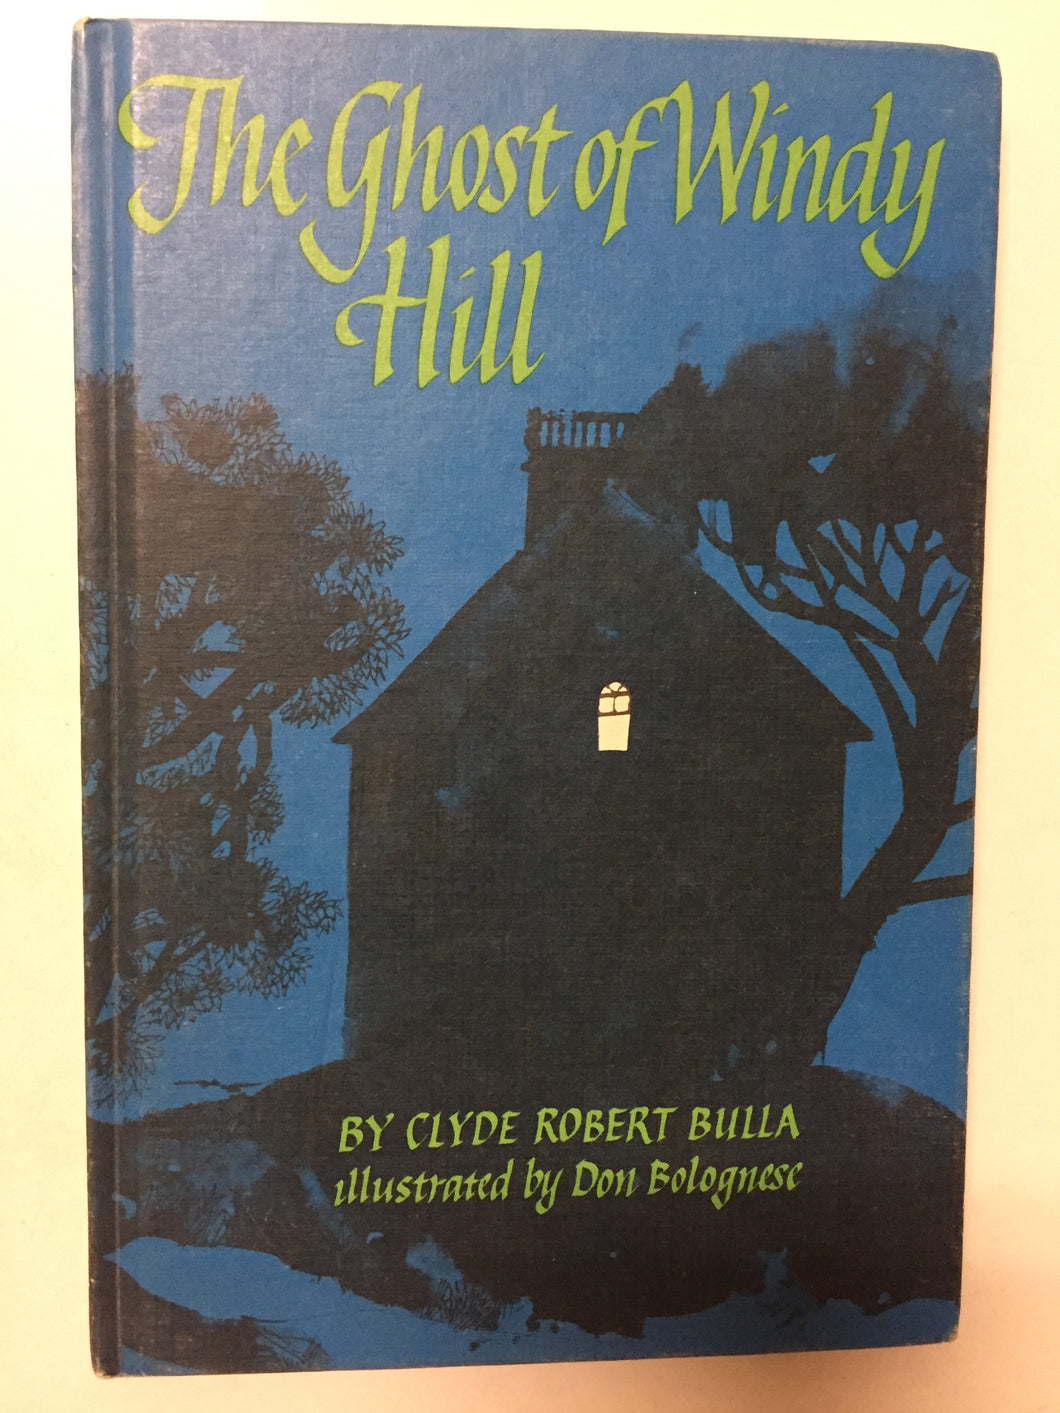 The Ghost Of Windy Hill - Slick Cat Books 